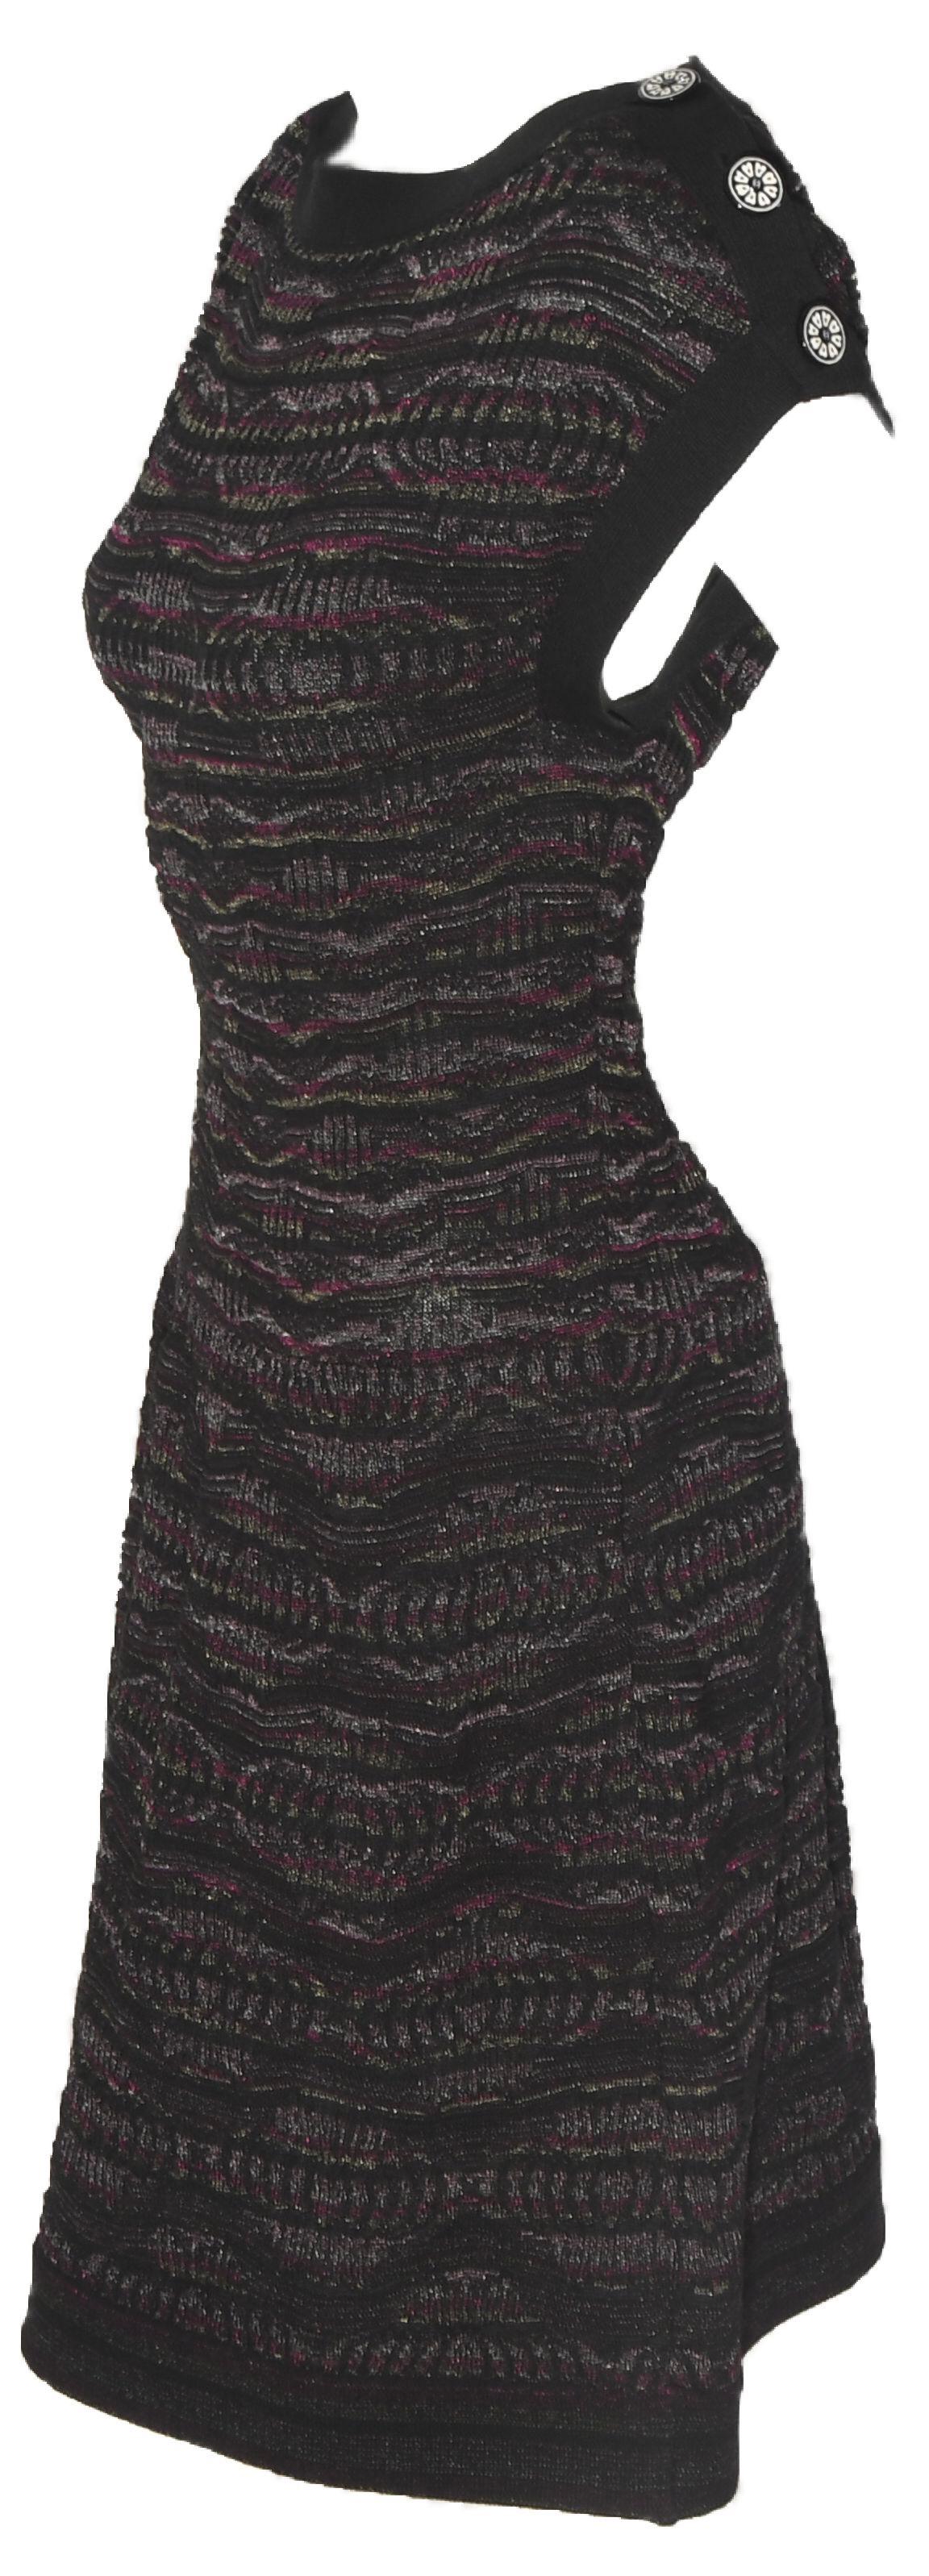 Women's Chanel Textured Knit Dress Black/Purple/Silver Throughout  For Sale